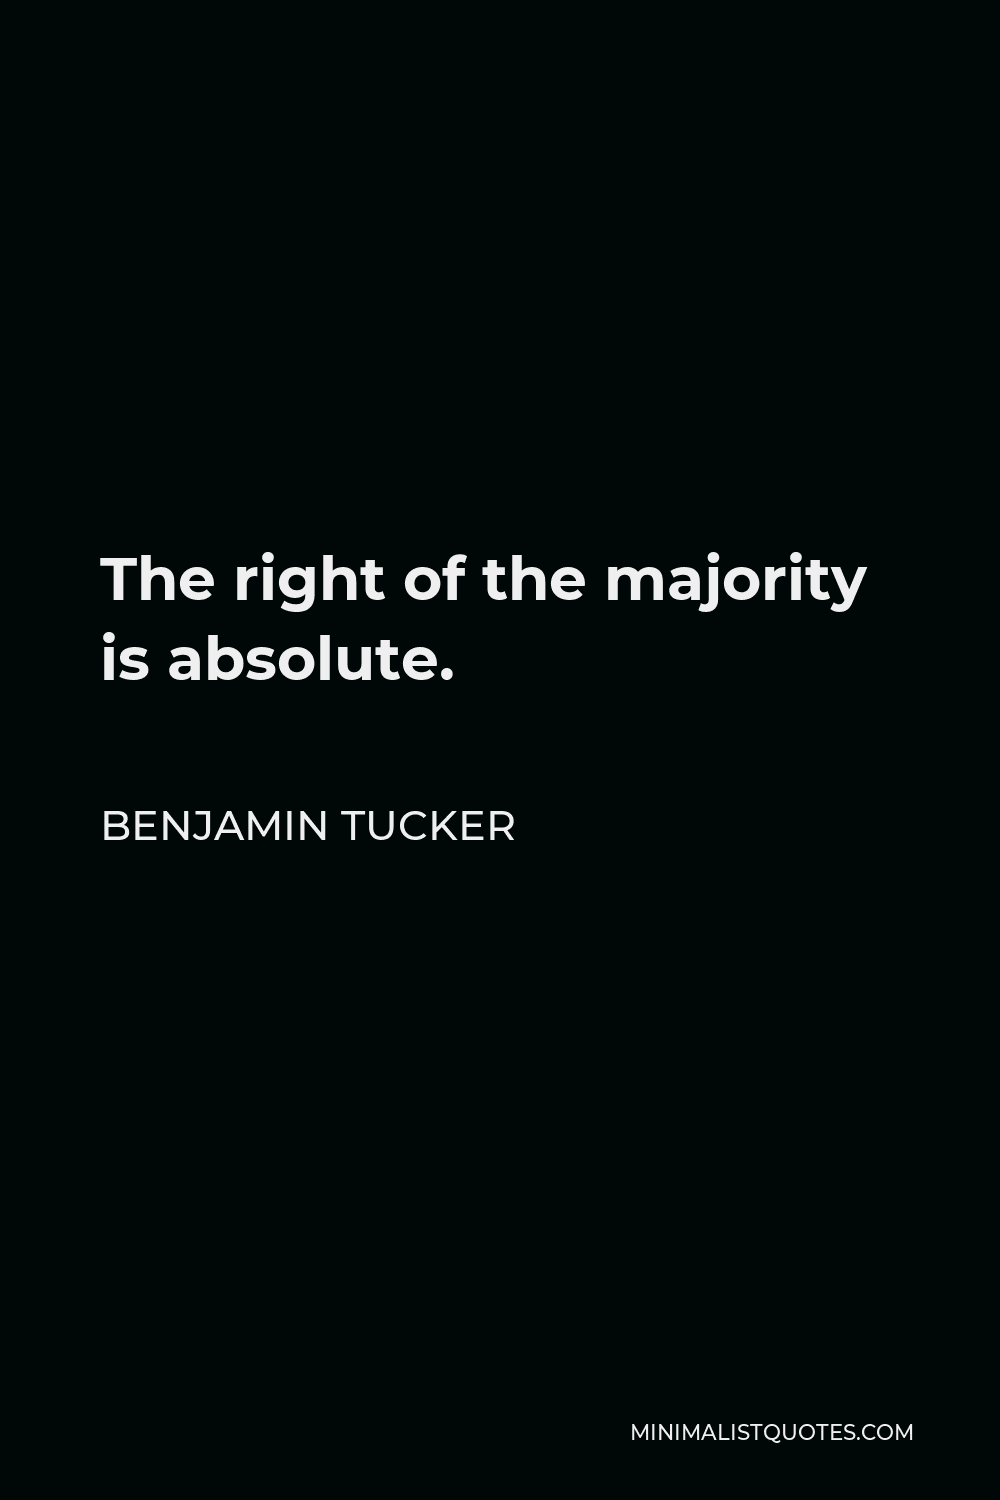 Benjamin Tucker Quote - The right of the majority is absolute.